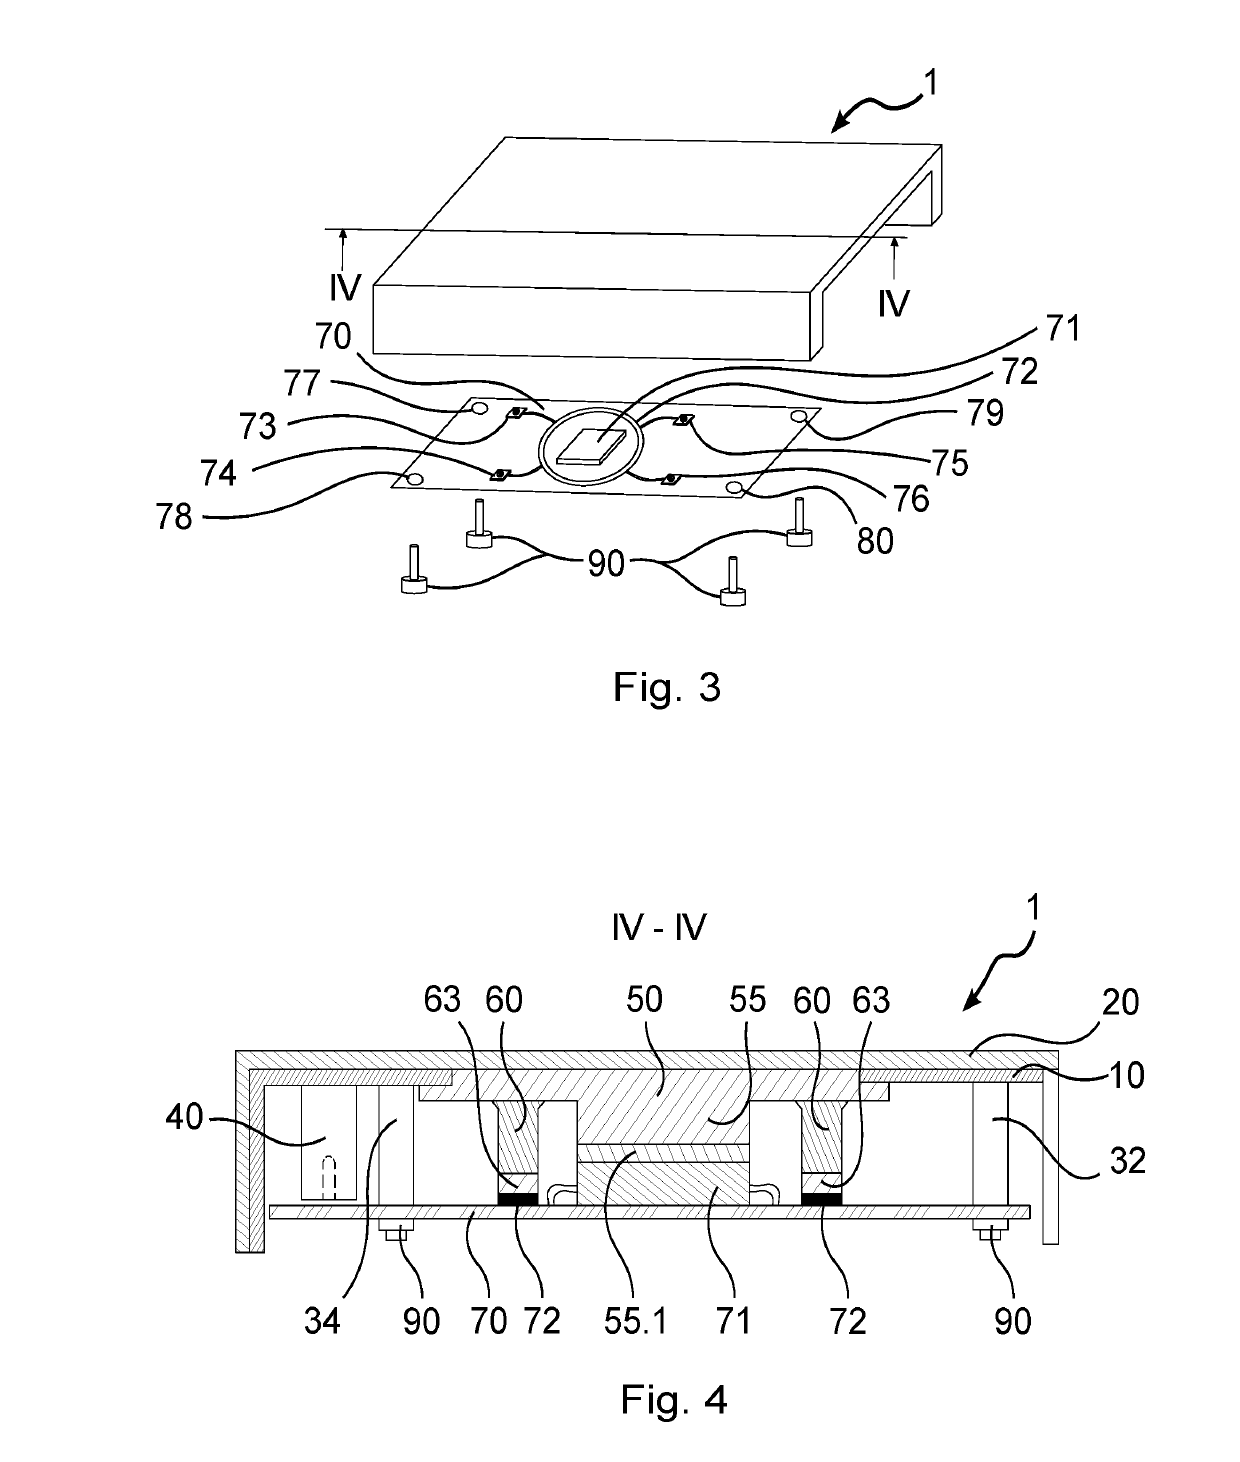 Single-piece cover for an electronic device